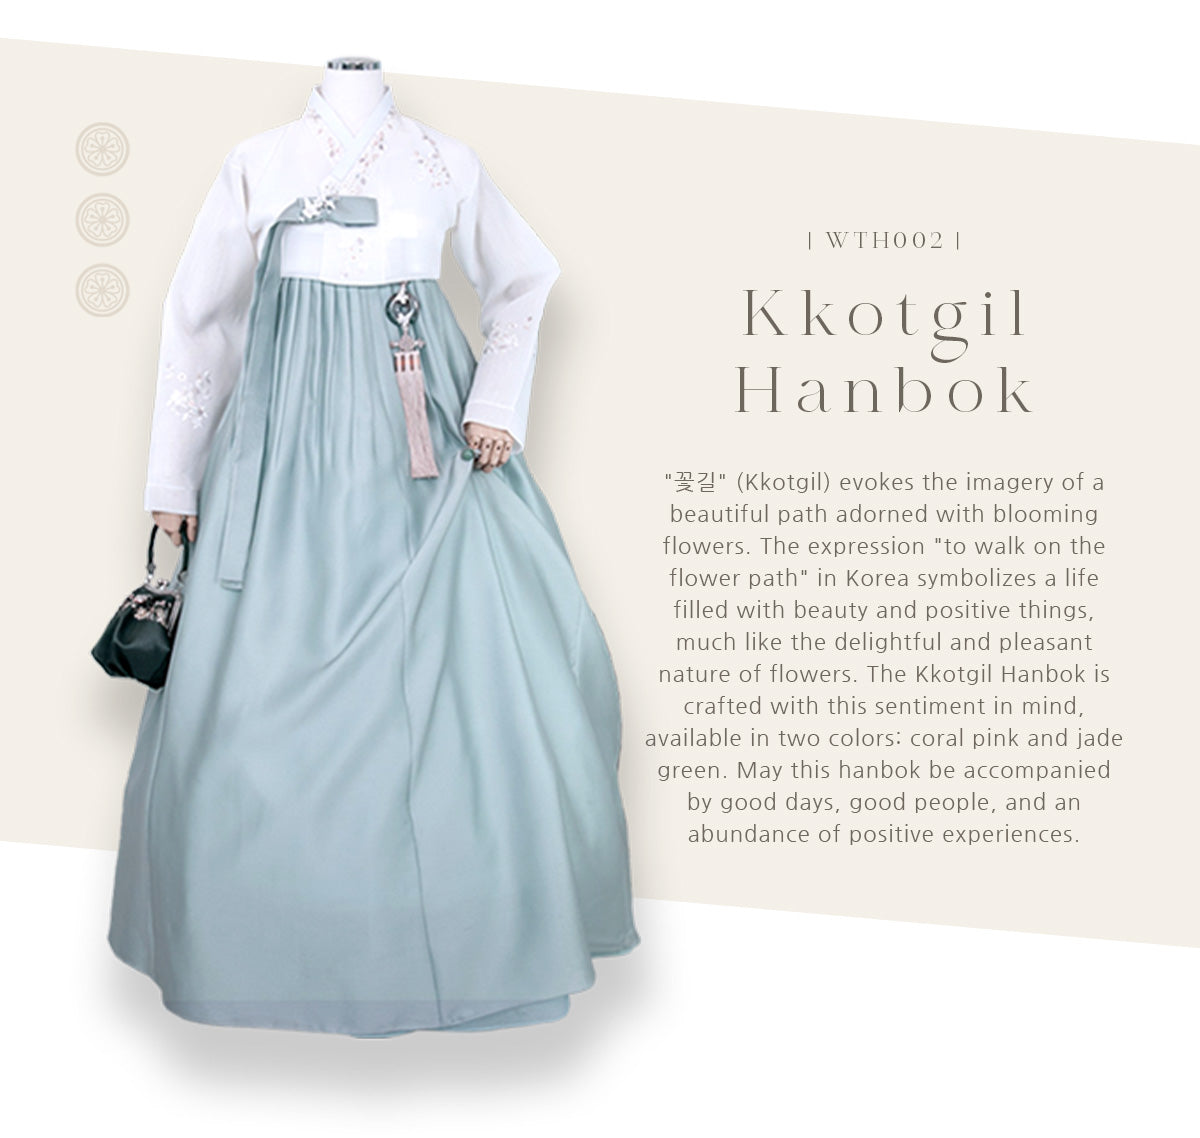 This hanbok dress is crafted from solid glossy fabric, exuding a luxurious shine.